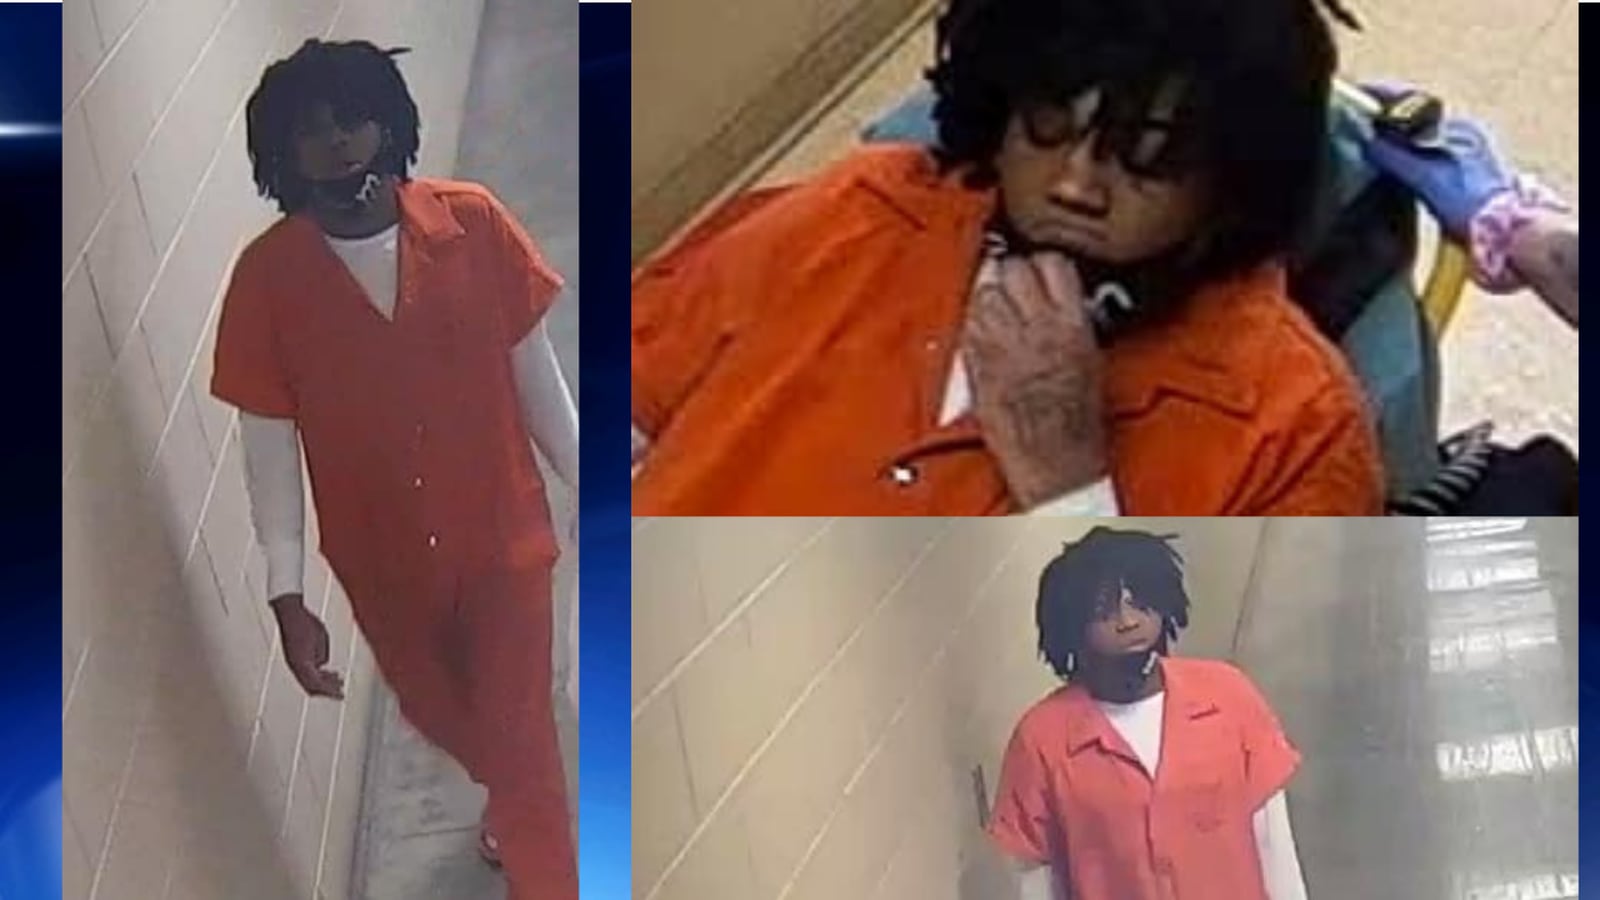 Bibb County jail inmate escapes from area hospital while being treated